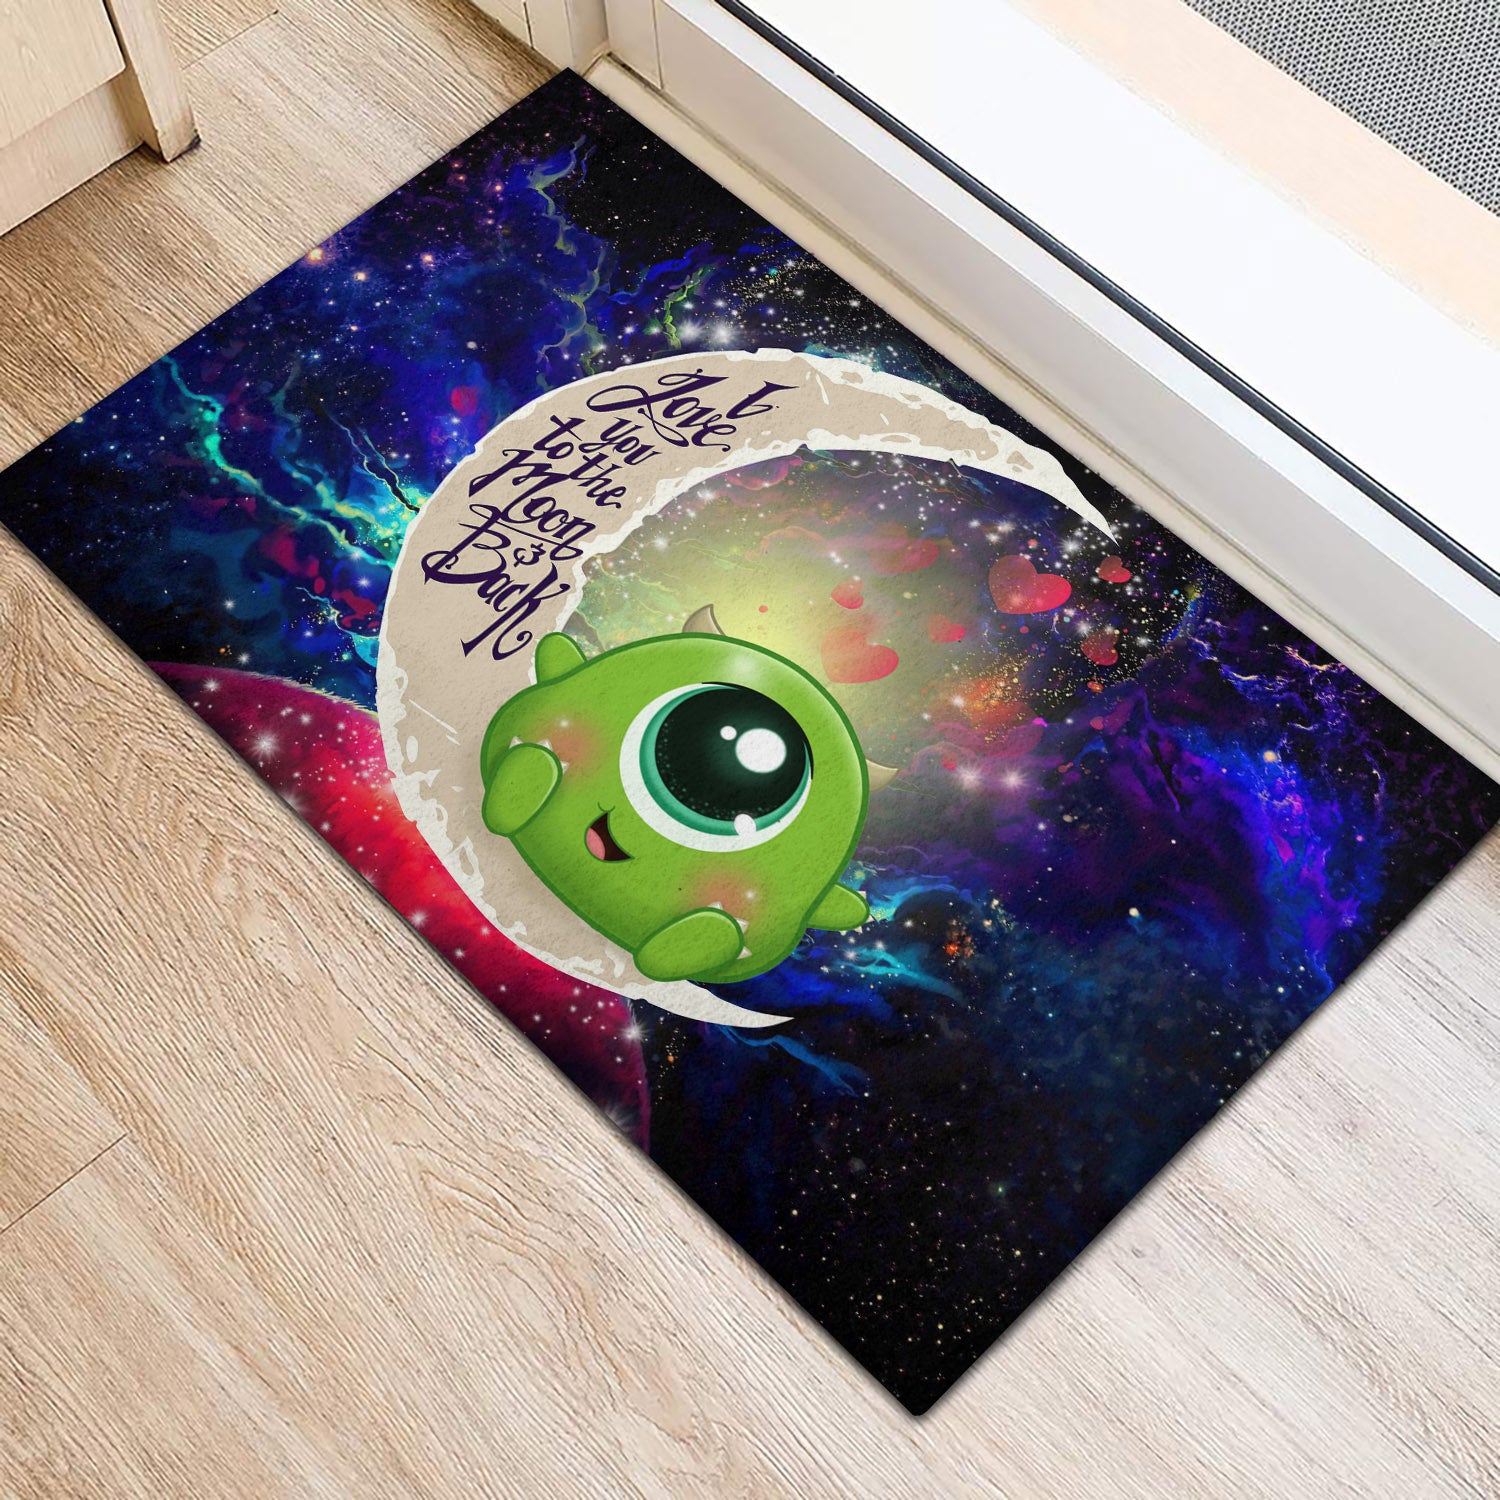 Cute Mike Monster Inc Love You To The Moon Galaxy Back Door Mats Home Decor